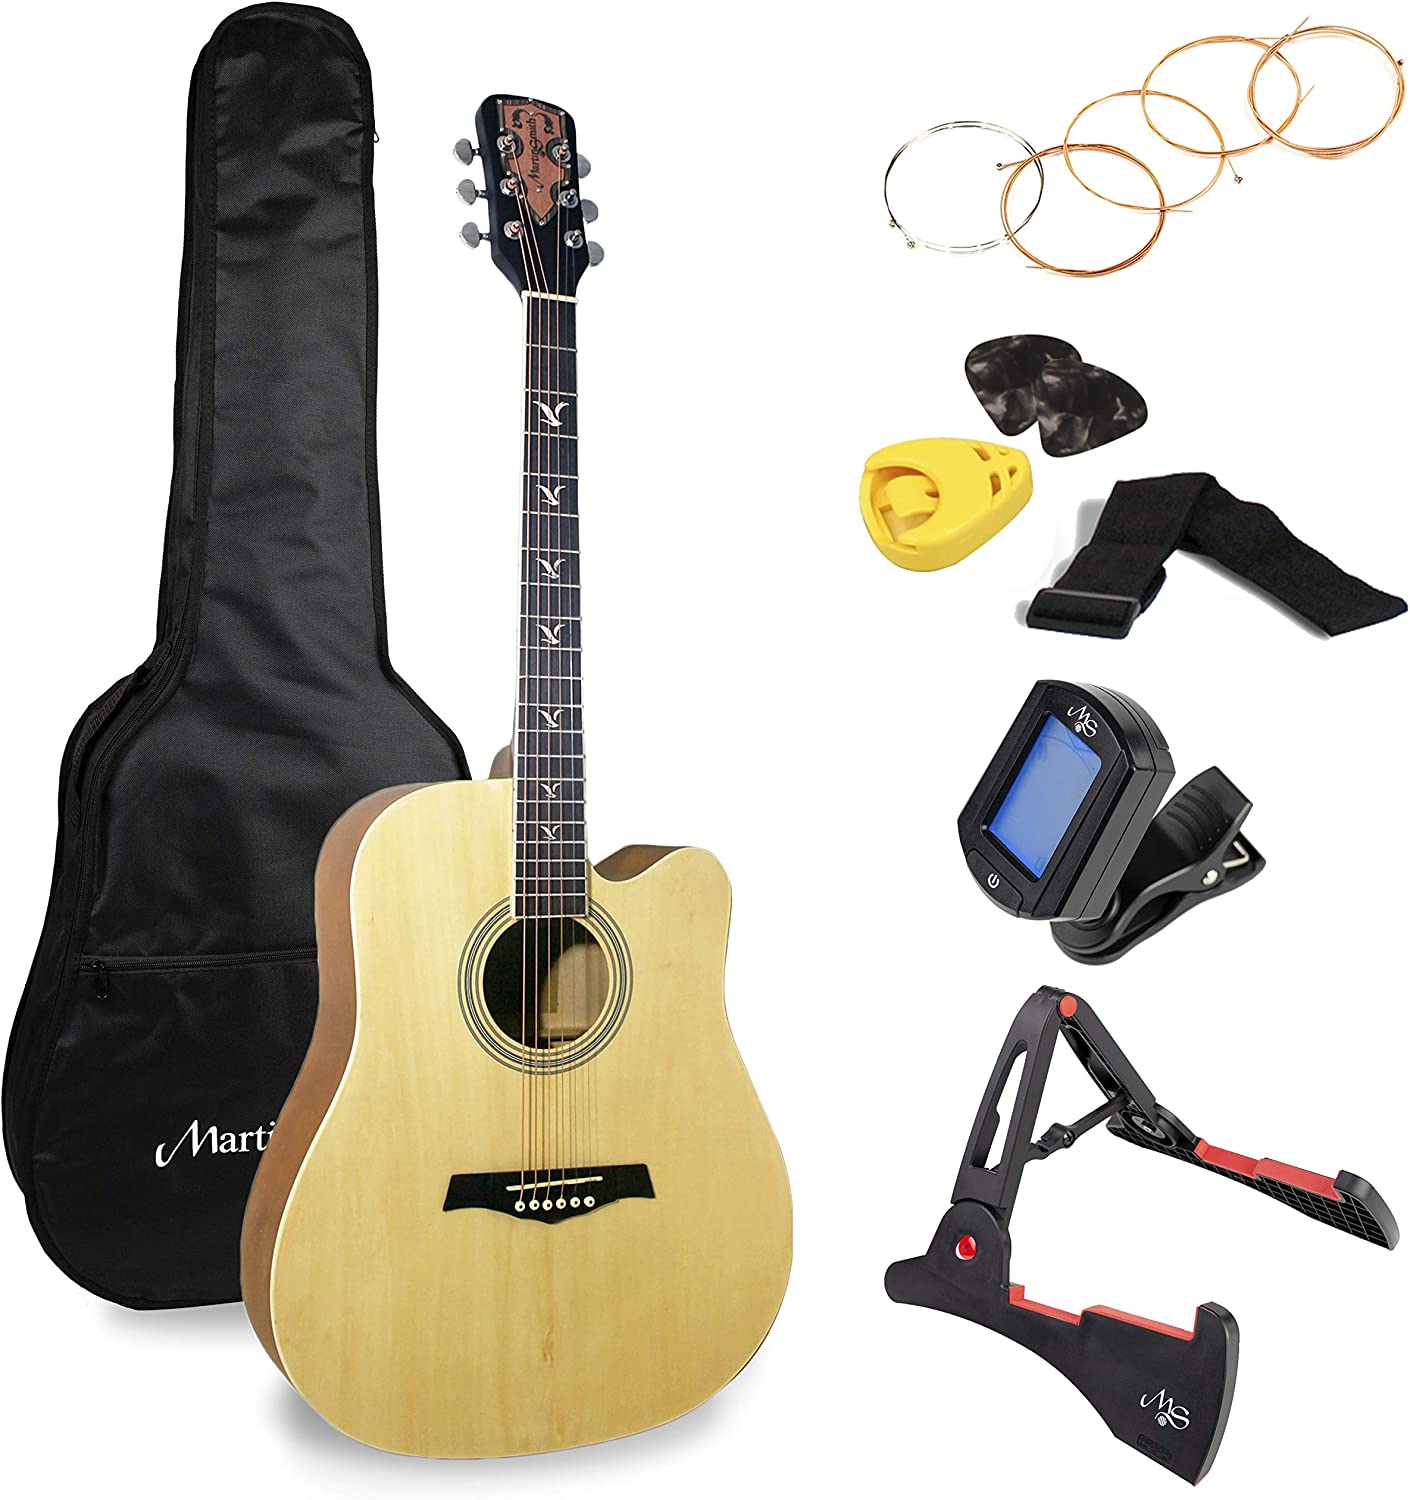 Photos - Other for Computer Martin PDT MS W-800 Premium Guitar Kit Nat W-800-N-PK 